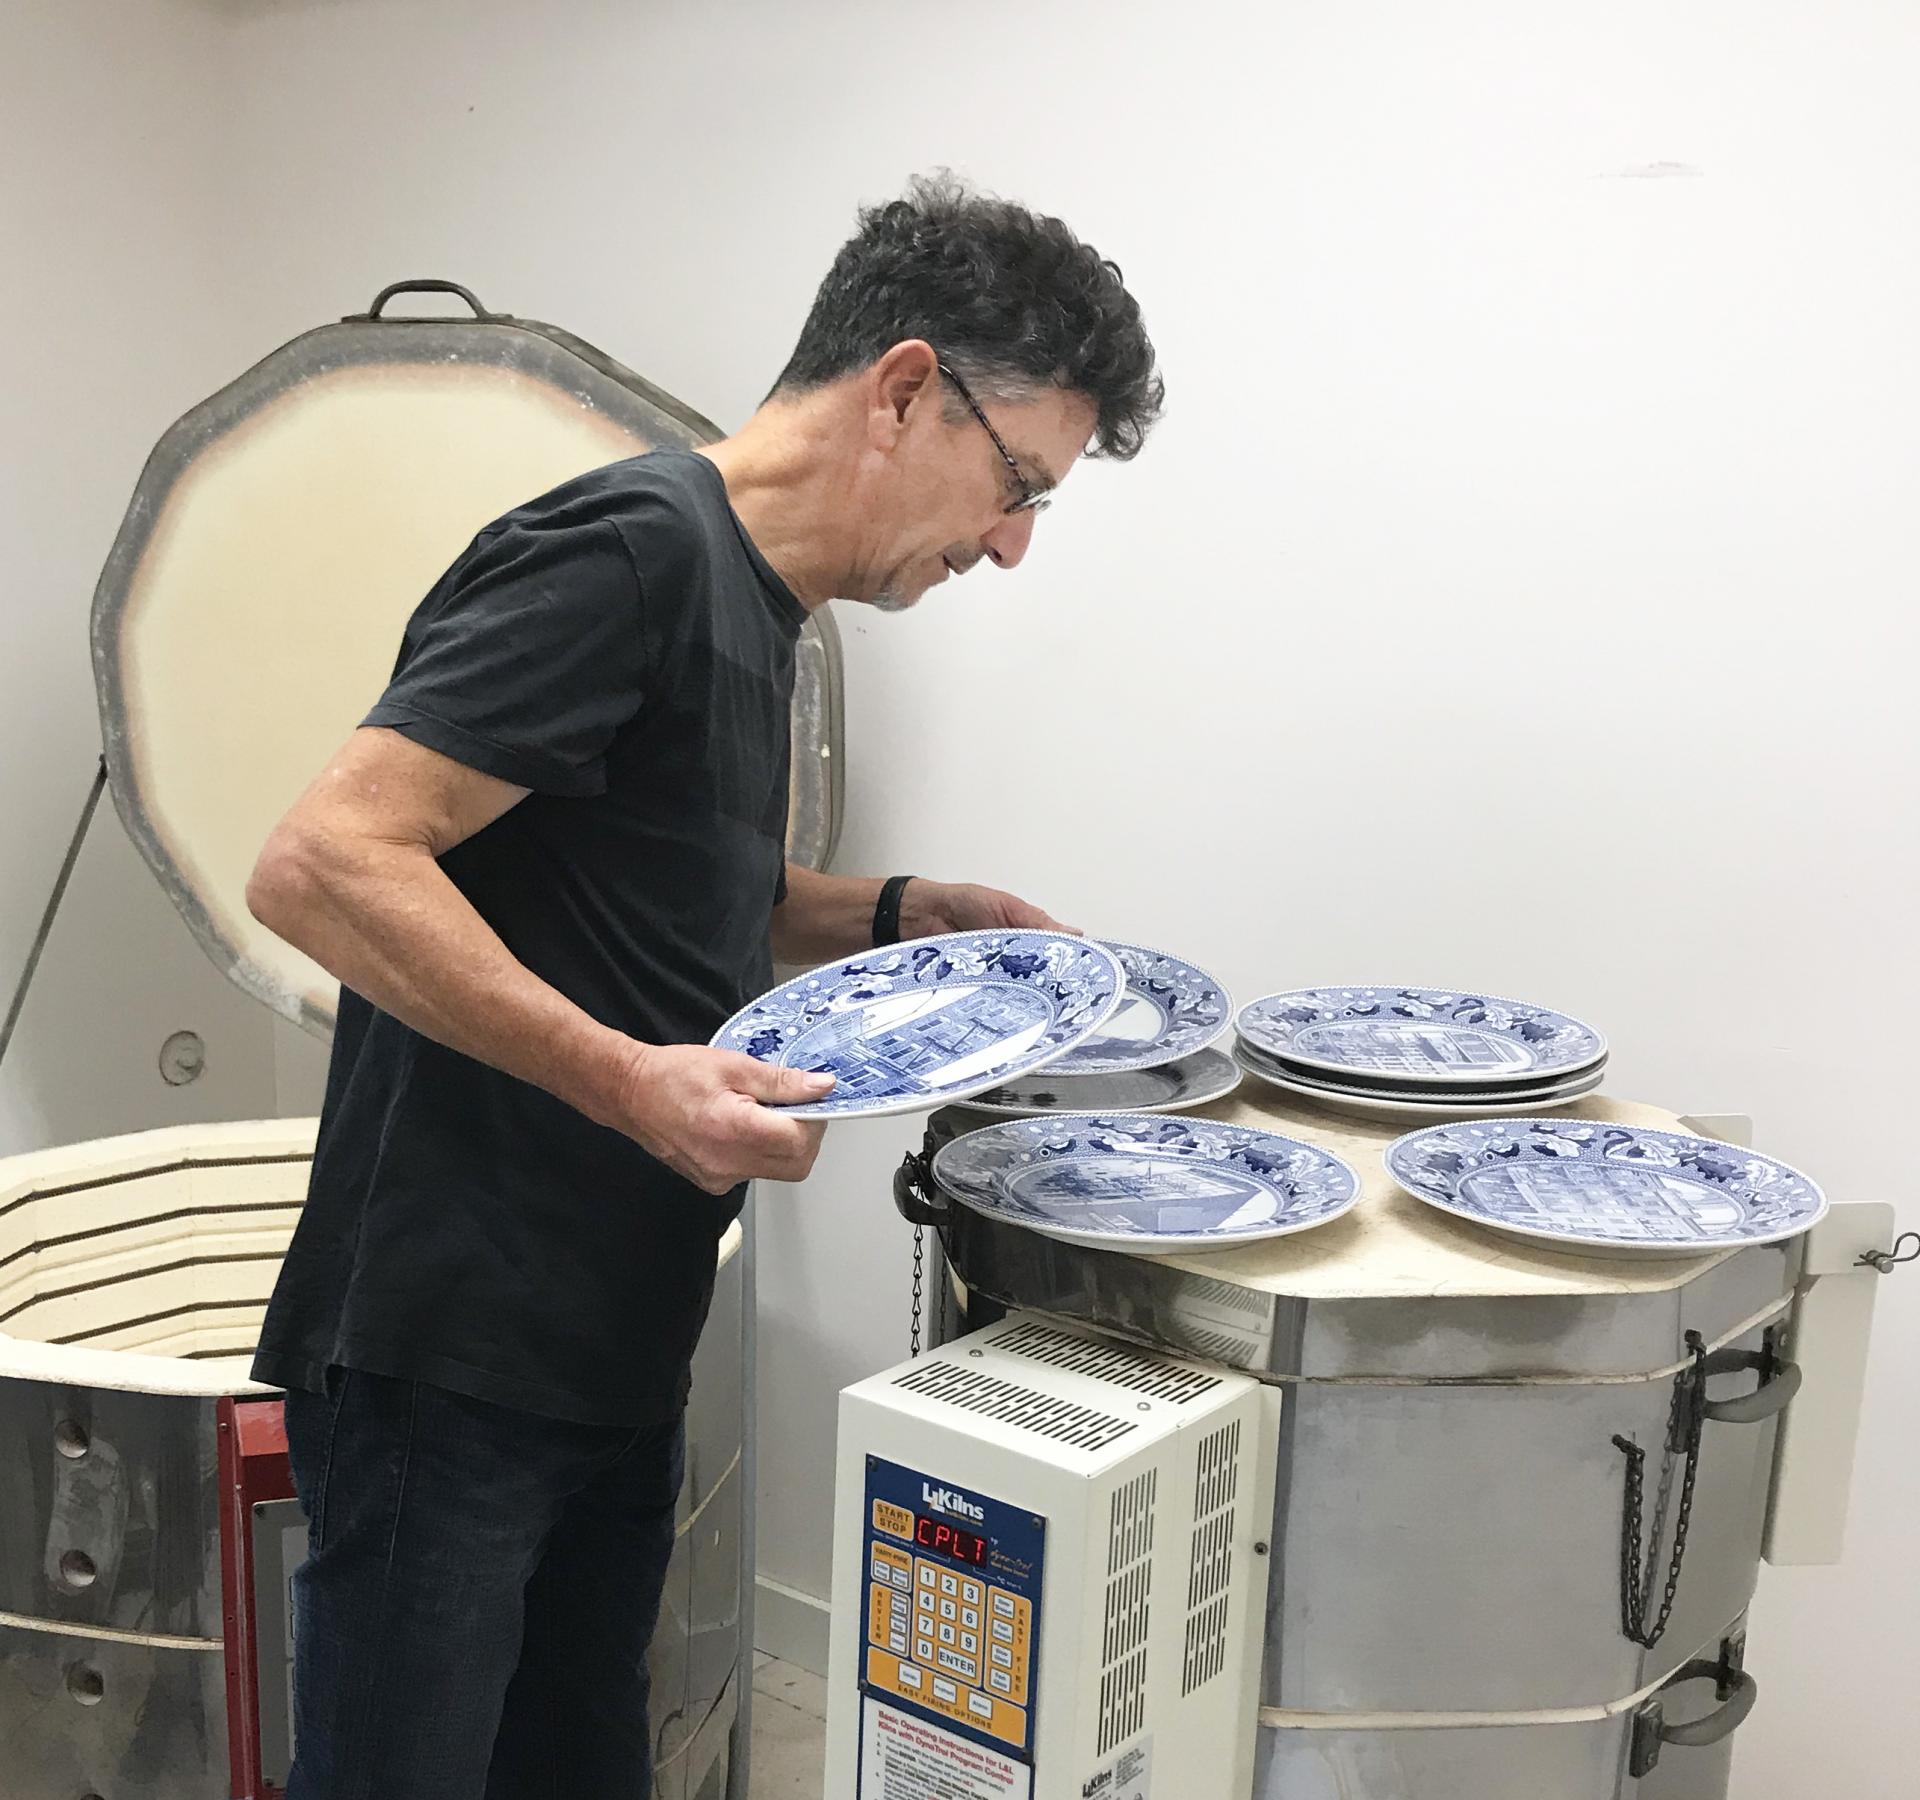 Paul Scott examines his blue and white transferware plates after they have come out of the kiln